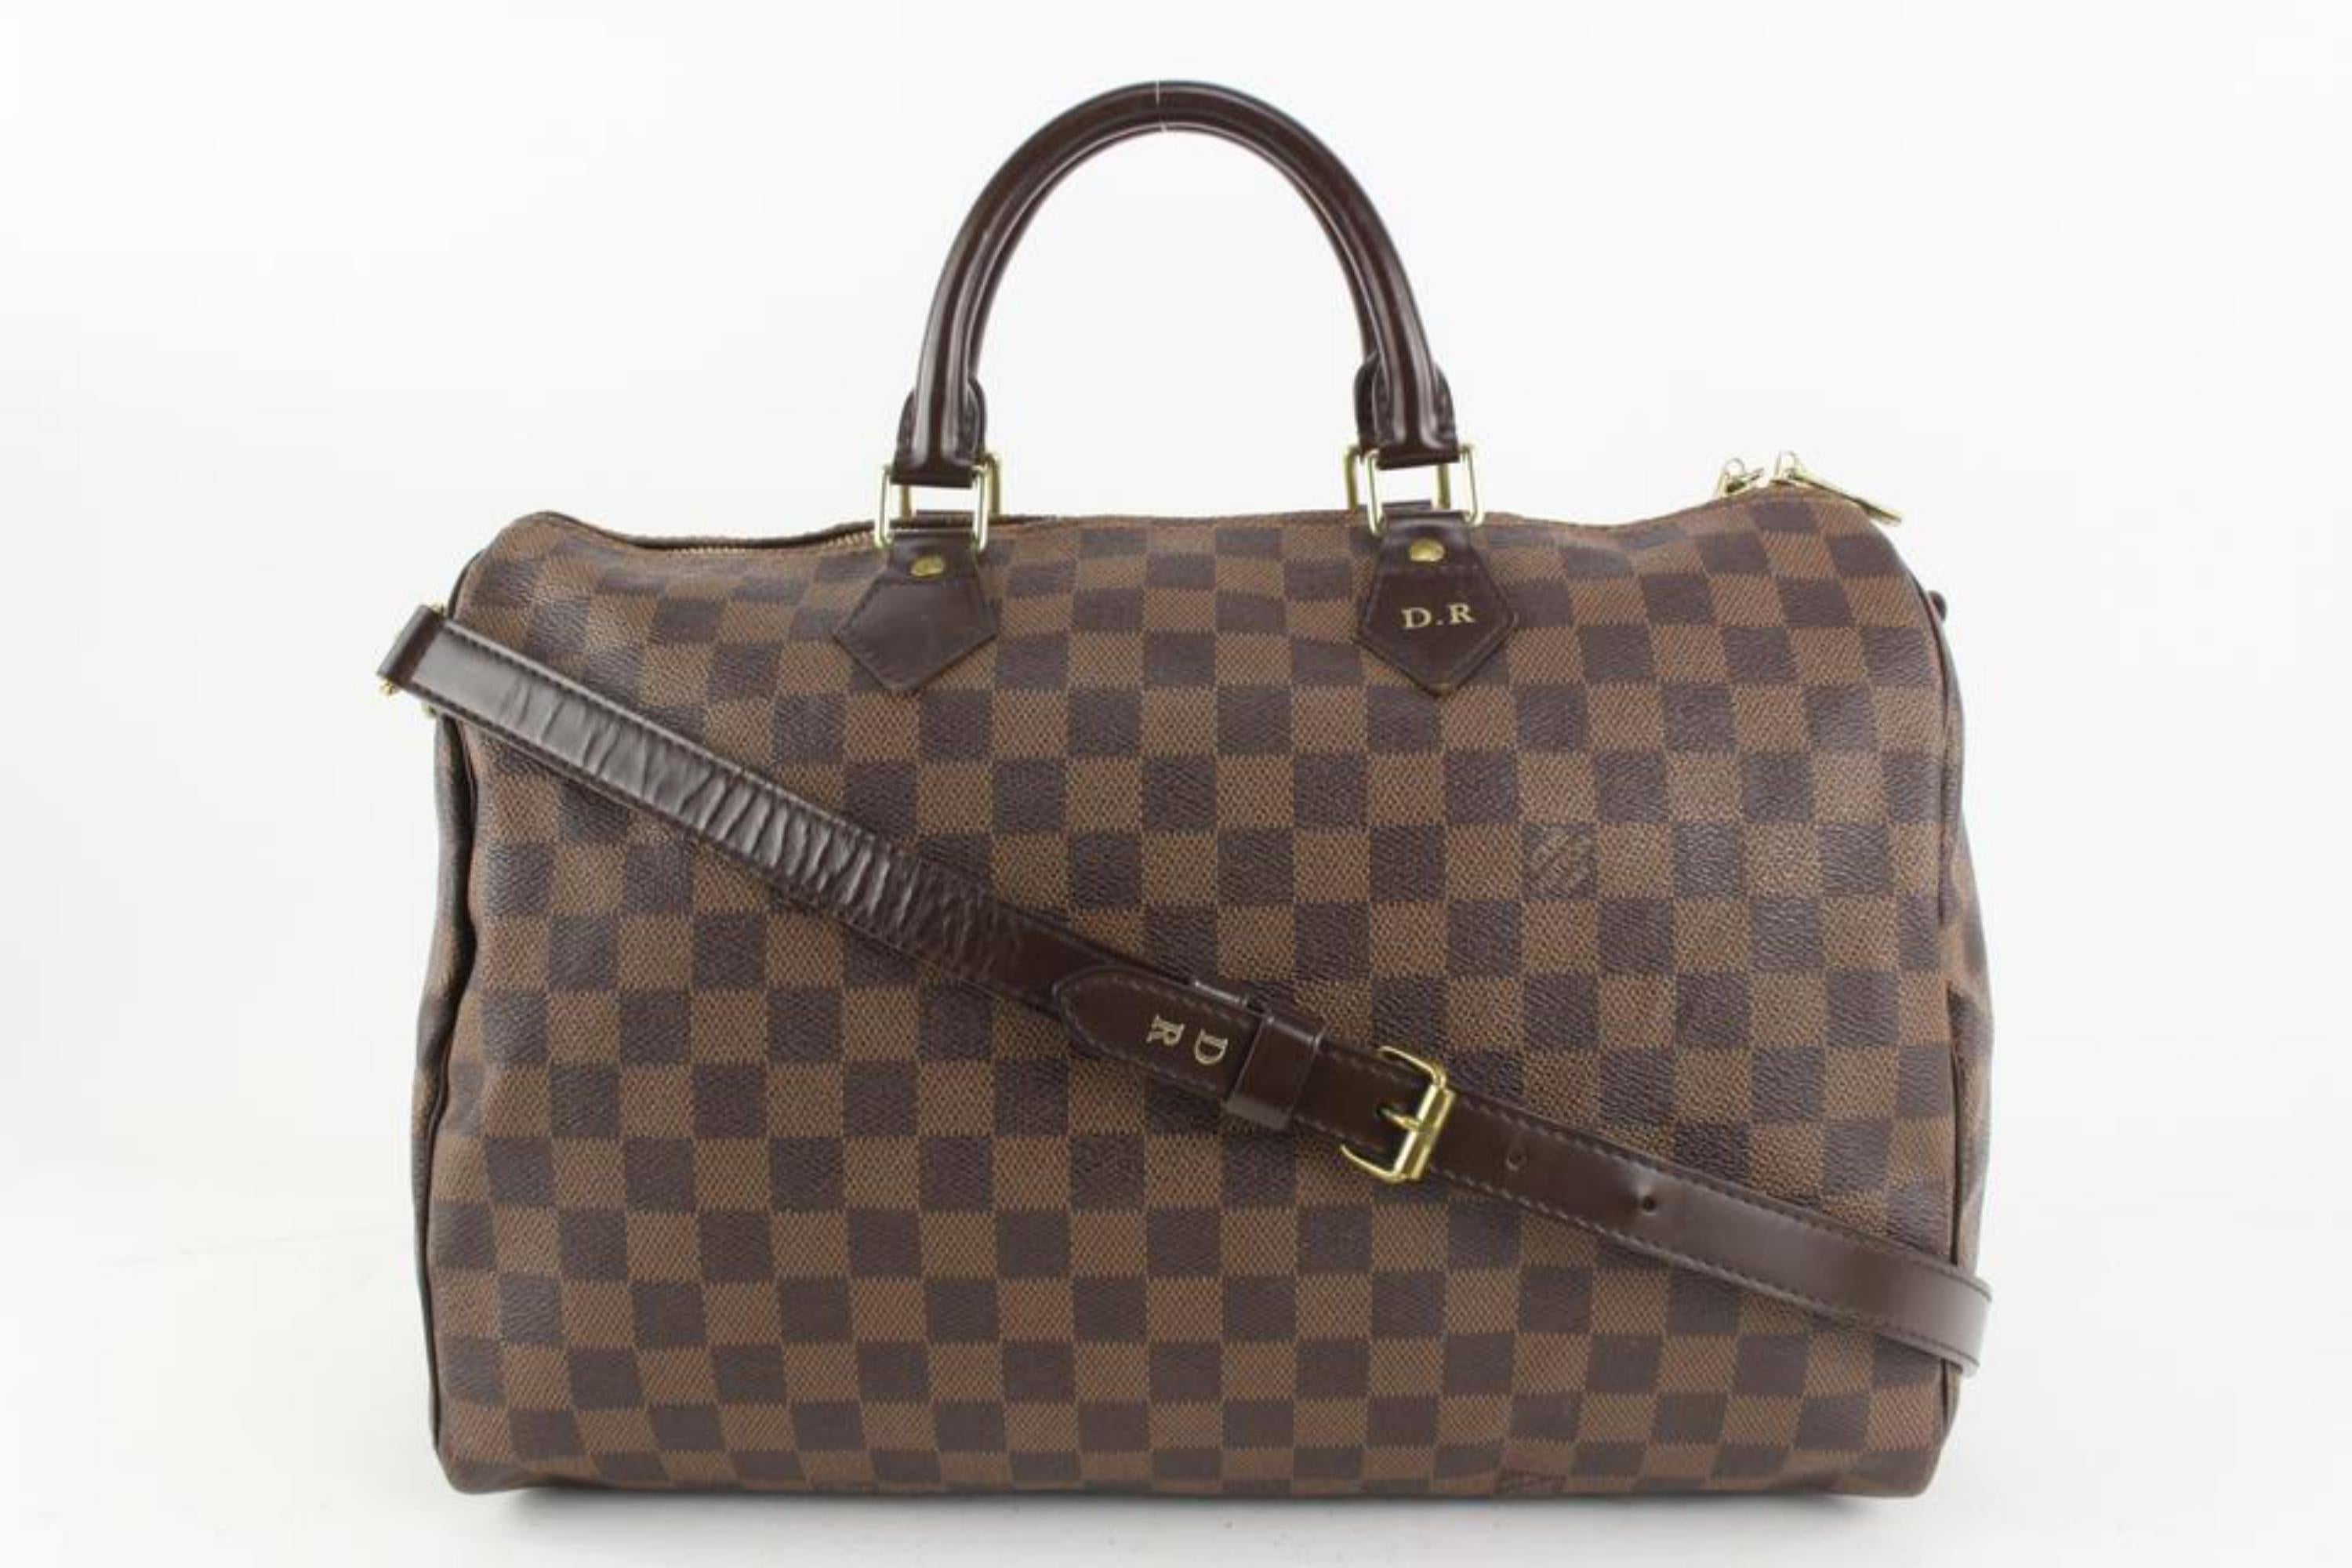 Louis Vuitton Damier Ebene Speedy Bandouliere 35 with Strap 112lv21 For Sale 2